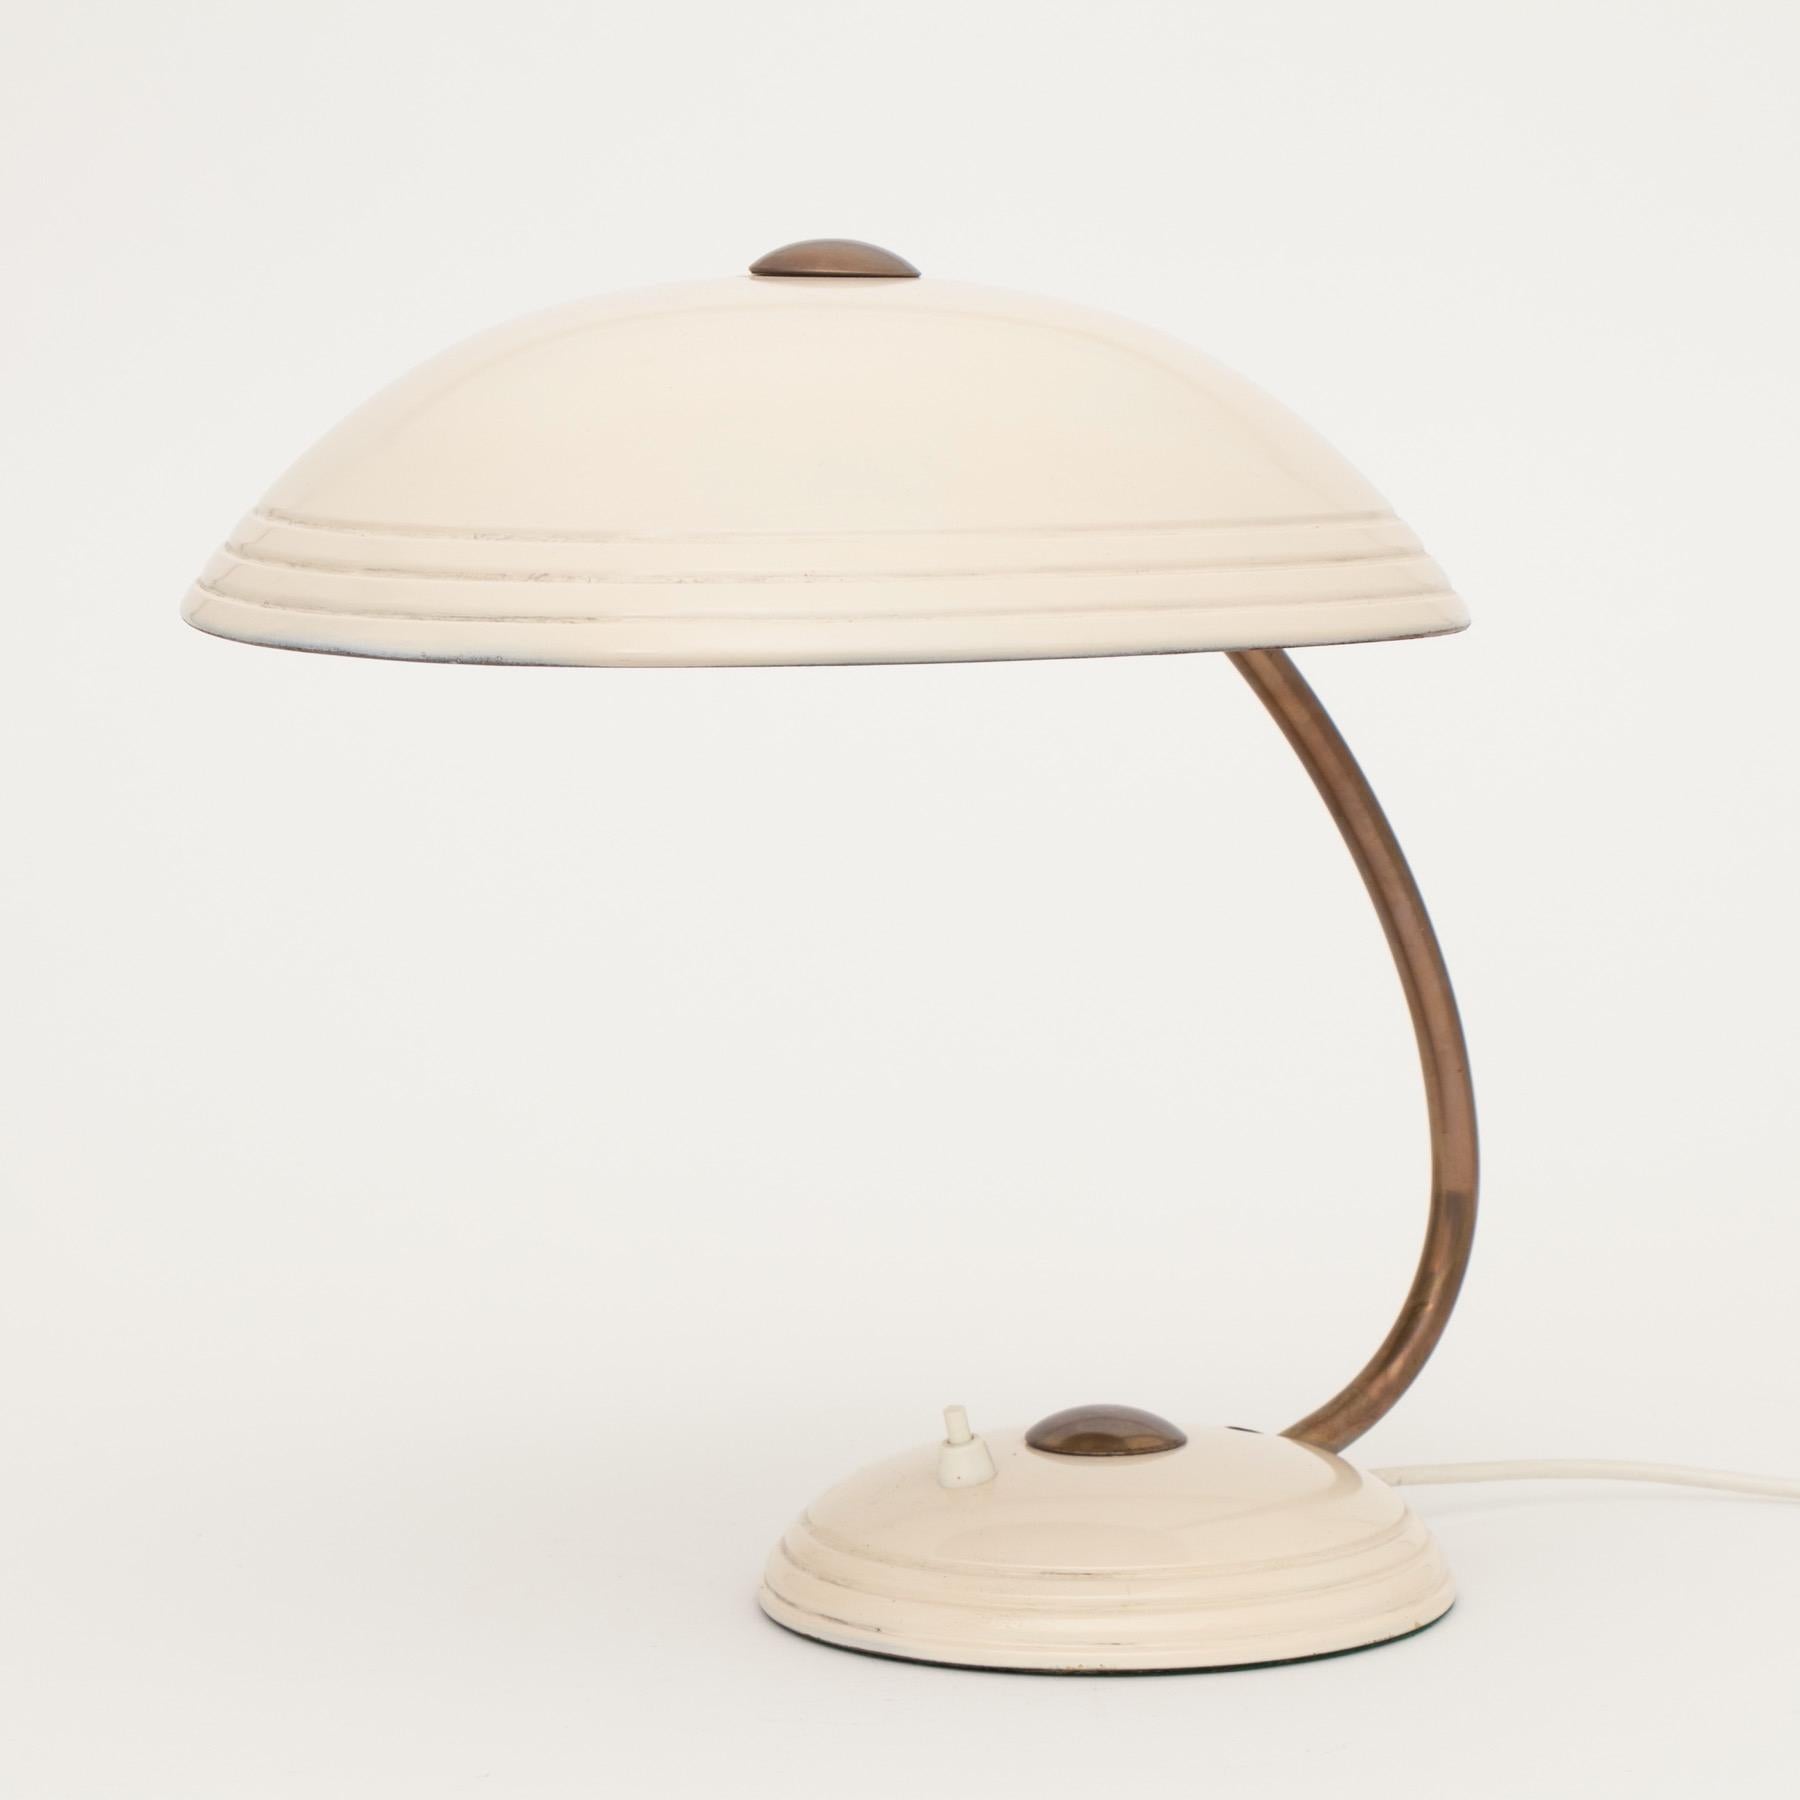 Midcentury halo flying saucer desk lamp with original paint finish in fantastic condition.
Netherlands,
circa 1960.
Measures: H 35.5cm, W 38cm, D 31cm.